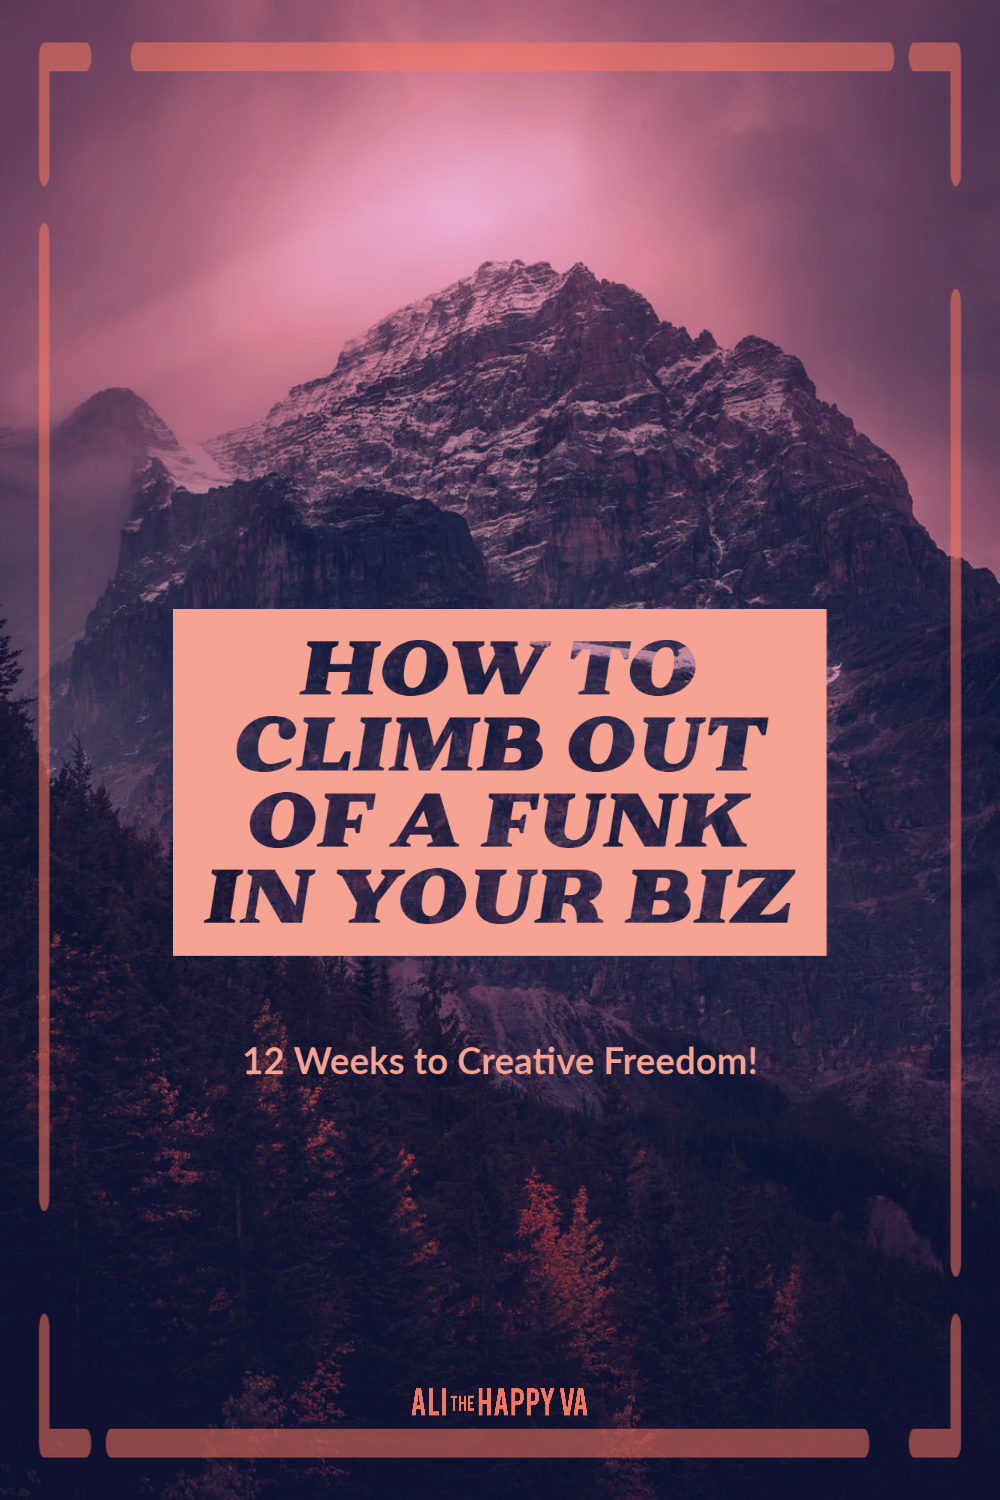 How to Start Climbing Out of a Funk in Your Biz